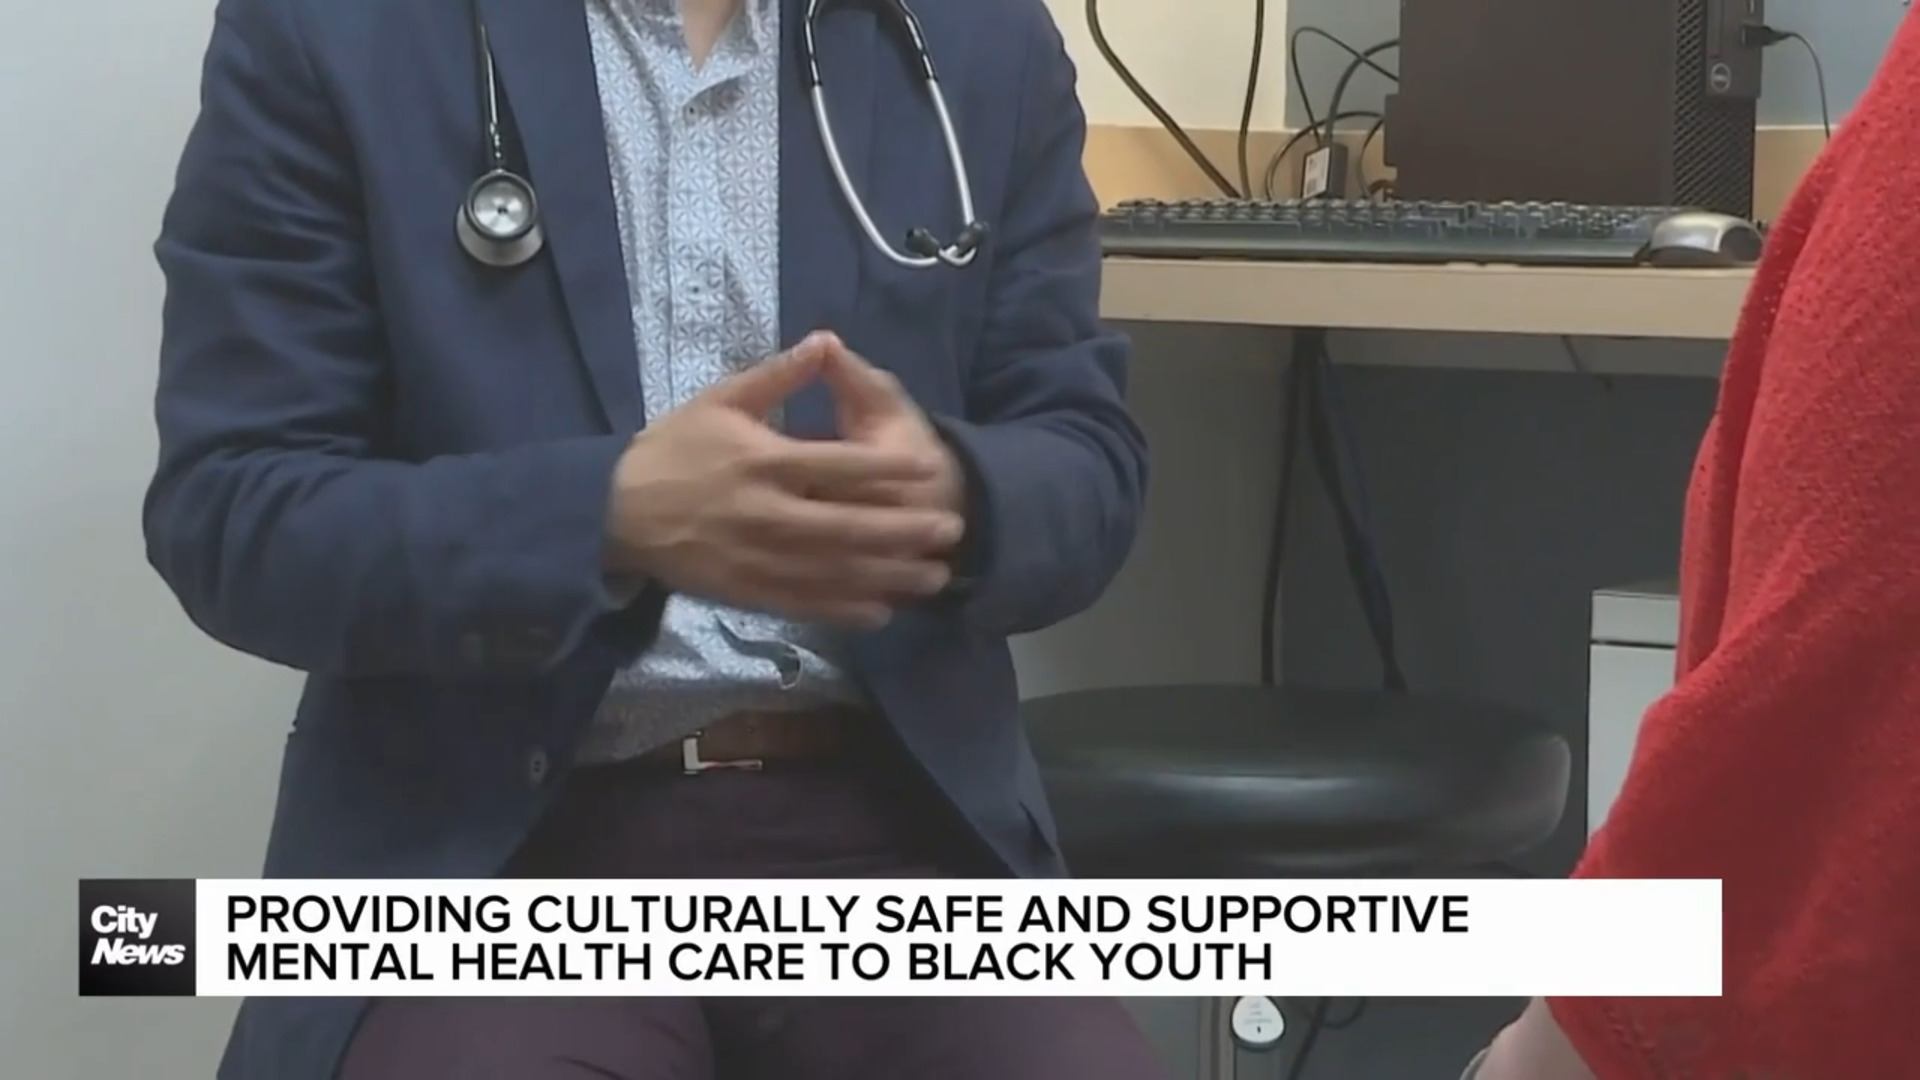 Providing culturally safe and supportive mental health care to Black youth